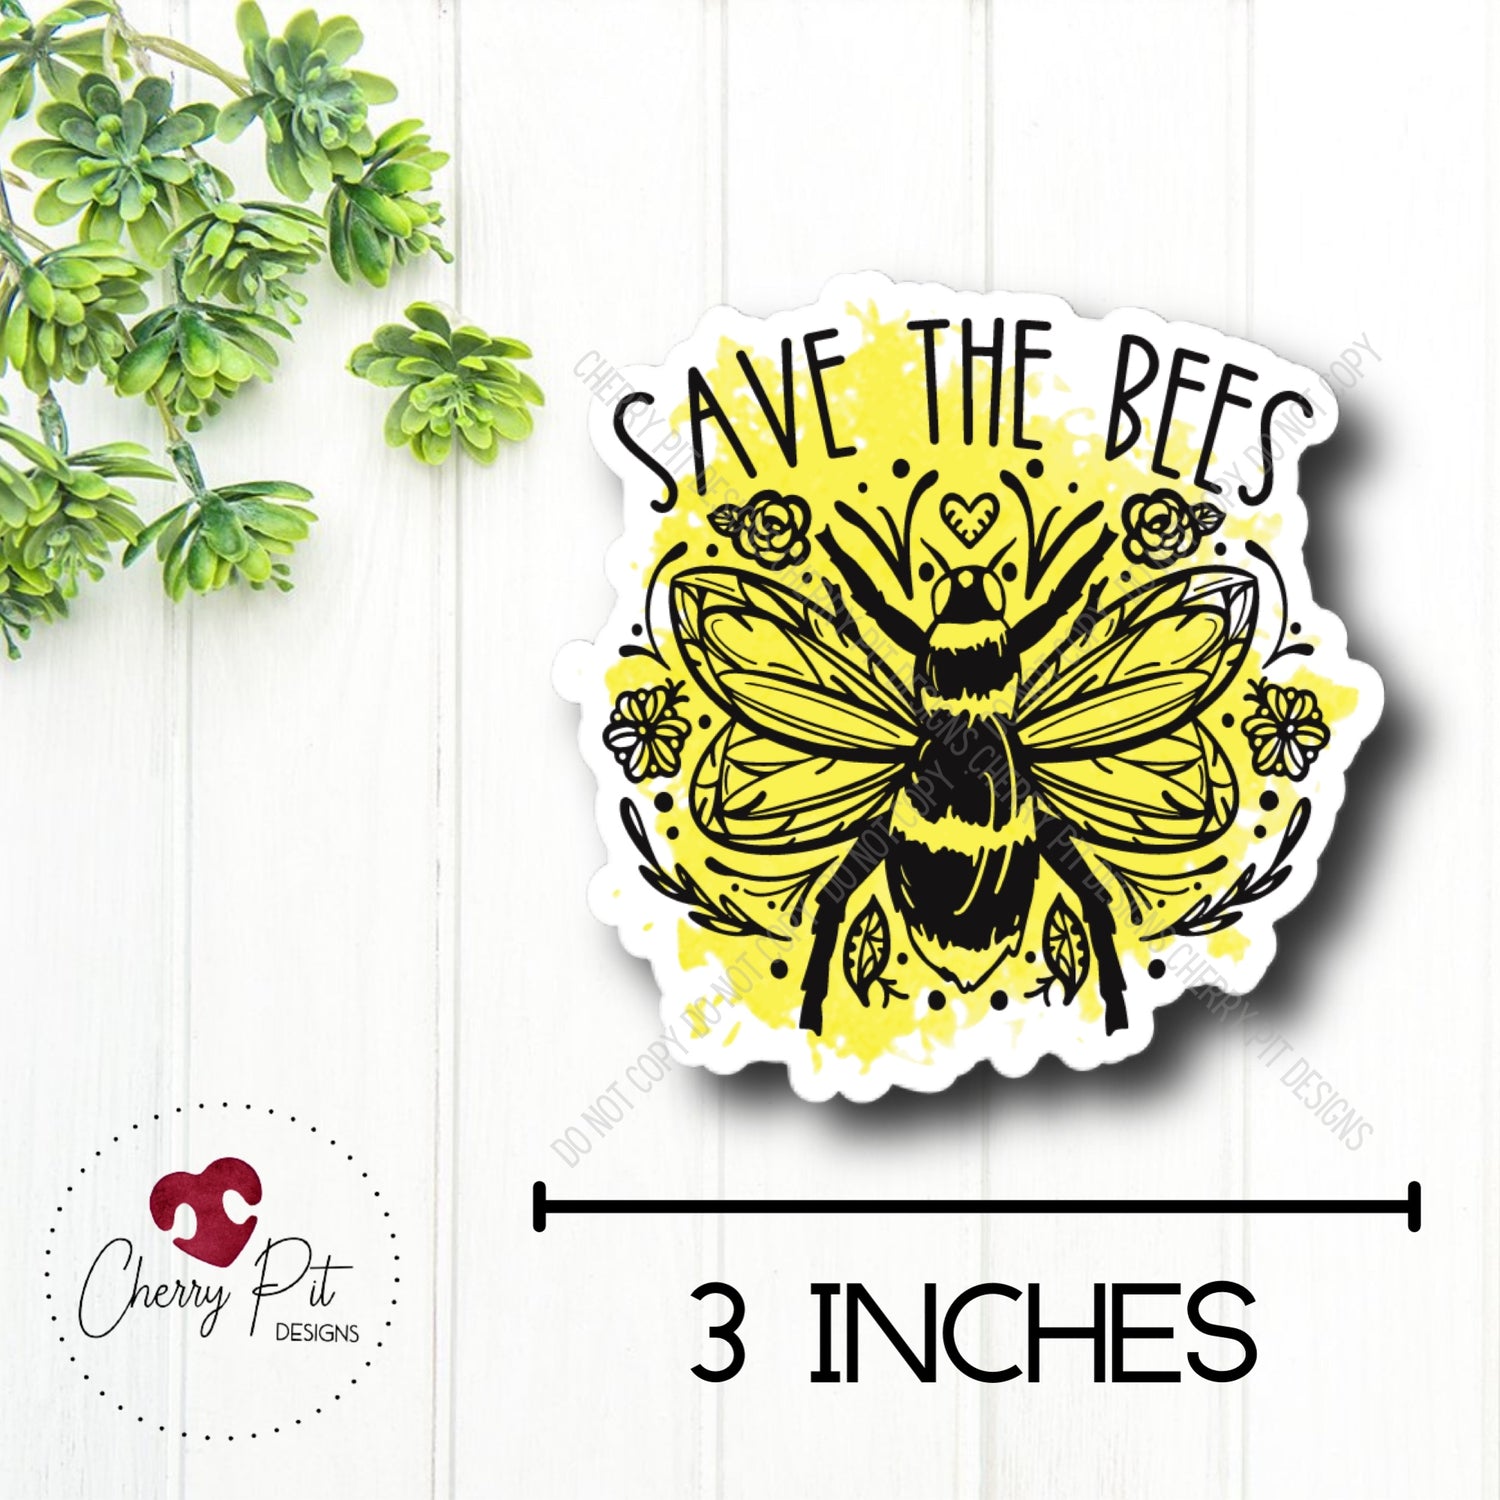 Save the Bees Vinyl Sticker Decal - Cherry Pit Designs